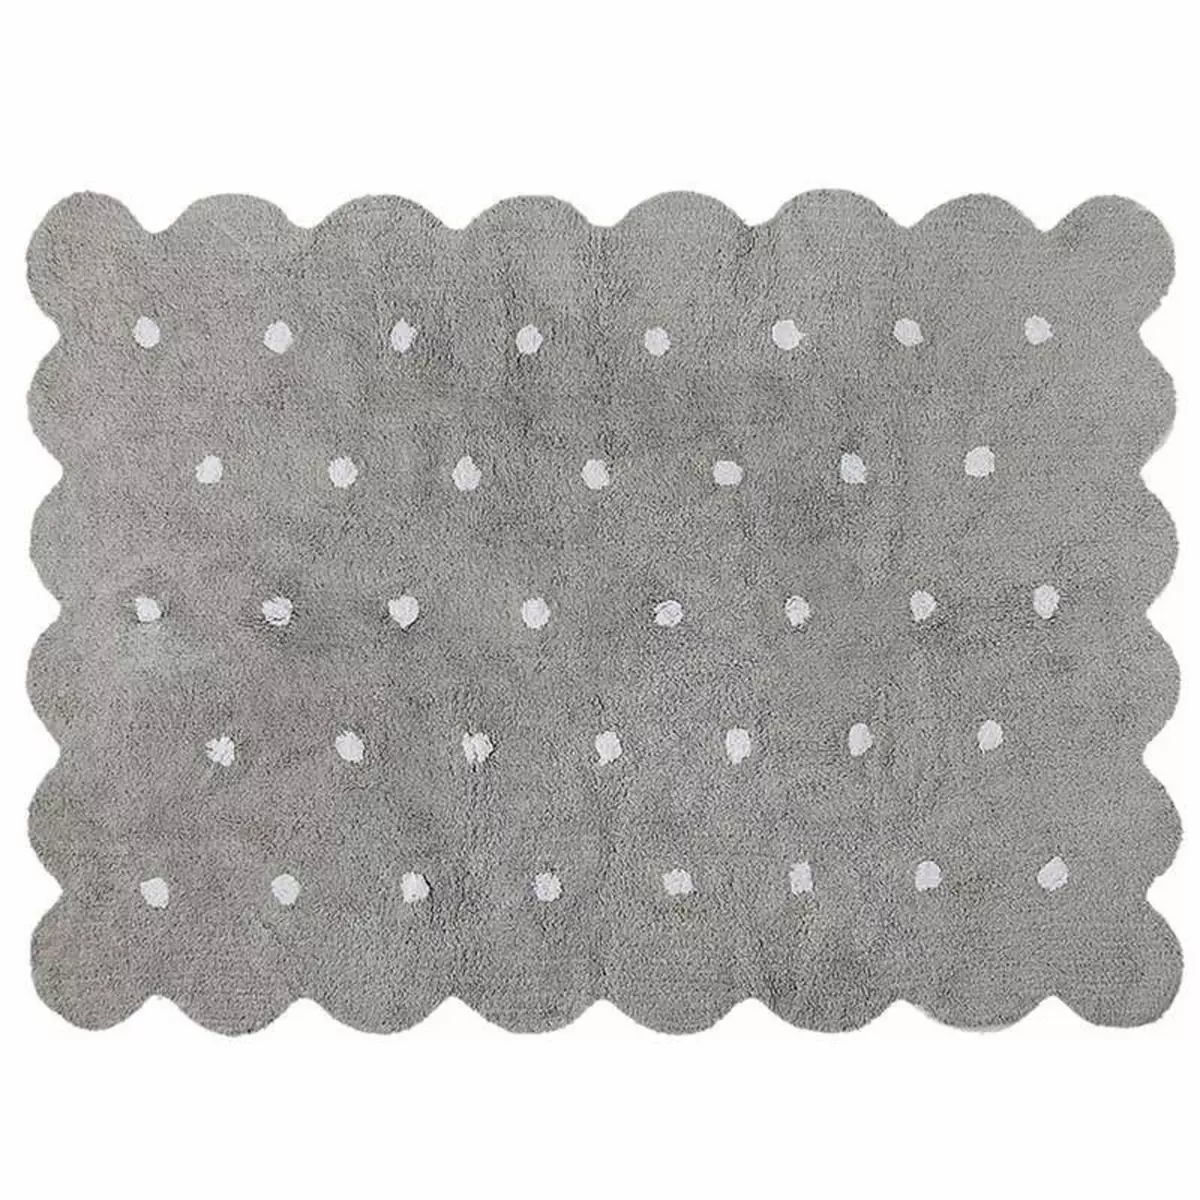 Lorena Canals Tapis coton forme biscuit - gris - 120 x 160